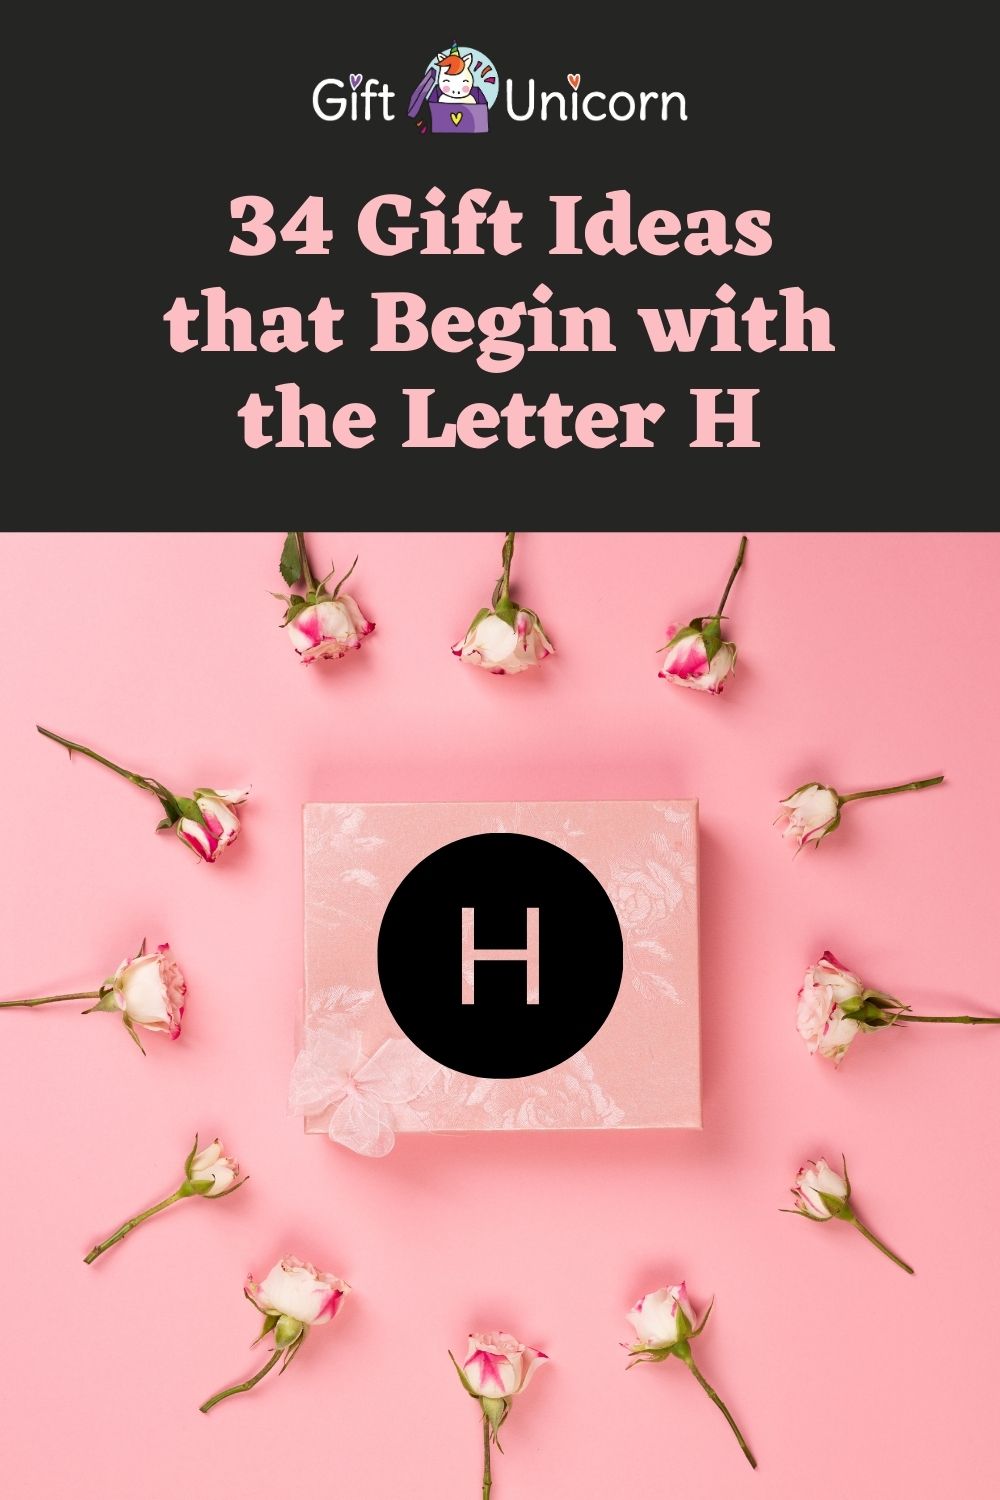 34 Gift Ideas that Begin with the Letter H - pinterest pin image